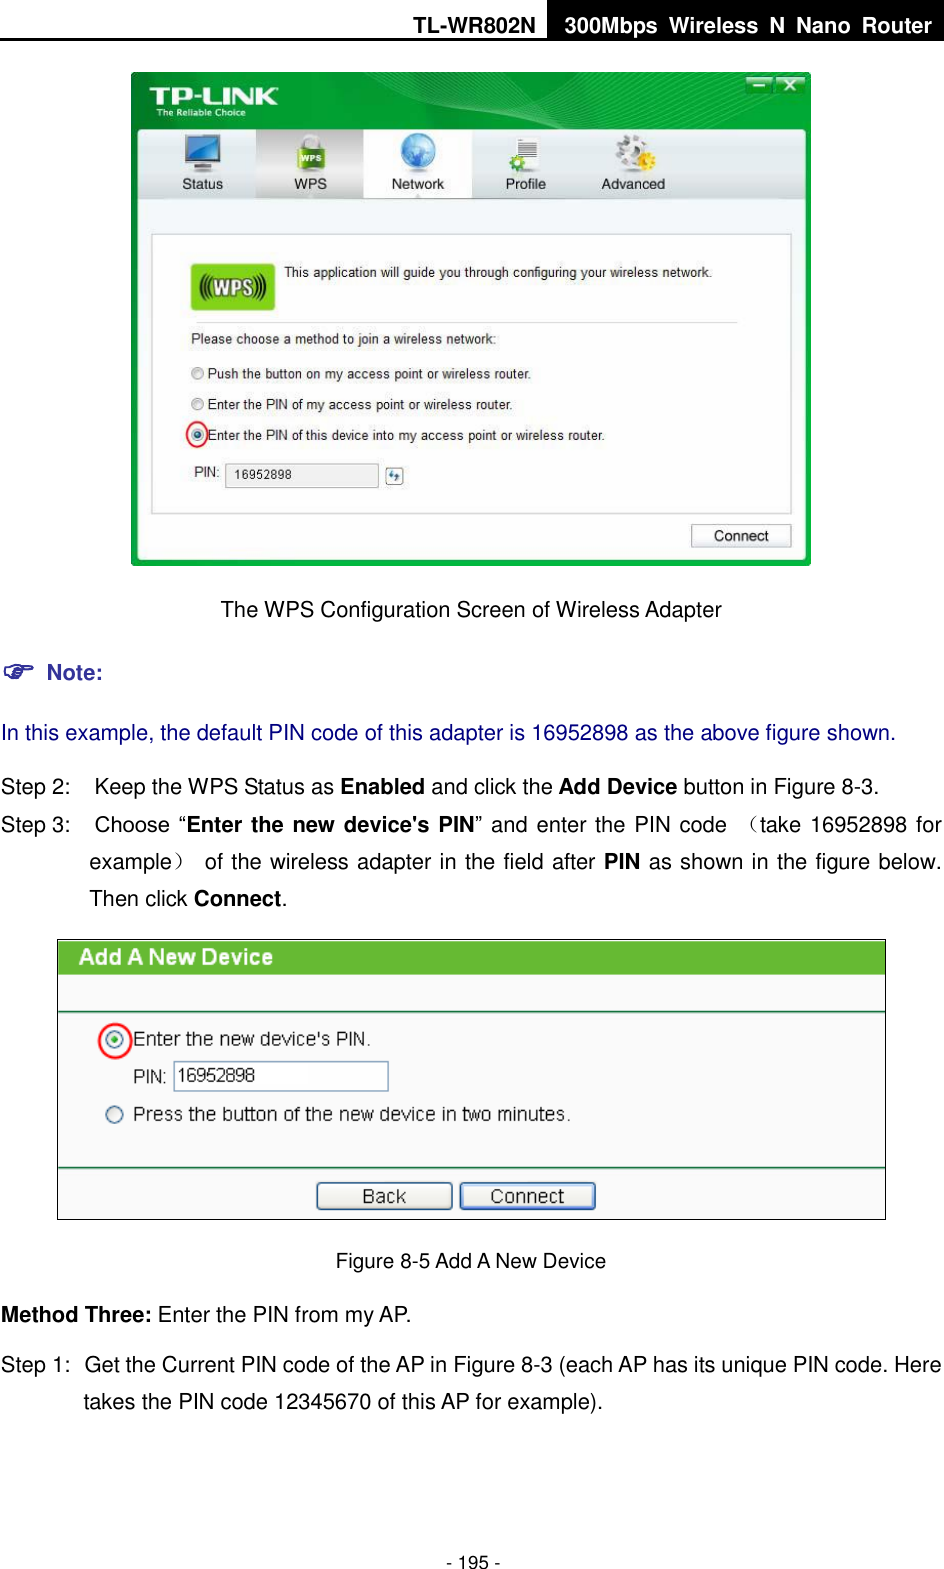 TL-WR802N 300Mbps  Wireless  N  Nano  Router  - 195 -  The WPS Configuration Screen of Wireless Adapter  Note: In this example, the default PIN code of this adapter is 16952898 as the above figure shown. Step 2:  Keep the WPS Status as Enabled and click the Add Device button in Figure 8-3. Step 3:  Choose “Enter the new device&apos;s PIN” and enter the PIN code  （take 16952898 for example）  of the wireless adapter in the field after PIN as shown in the figure below. Then click Connect.  Figure 8-5 Add A New Device Method Three: Enter the PIN from my AP. Step 1:  Get the Current PIN code of the AP in Figure 8-3 (each AP has its unique PIN code. Here takes the PIN code 12345670 of this AP for example). 